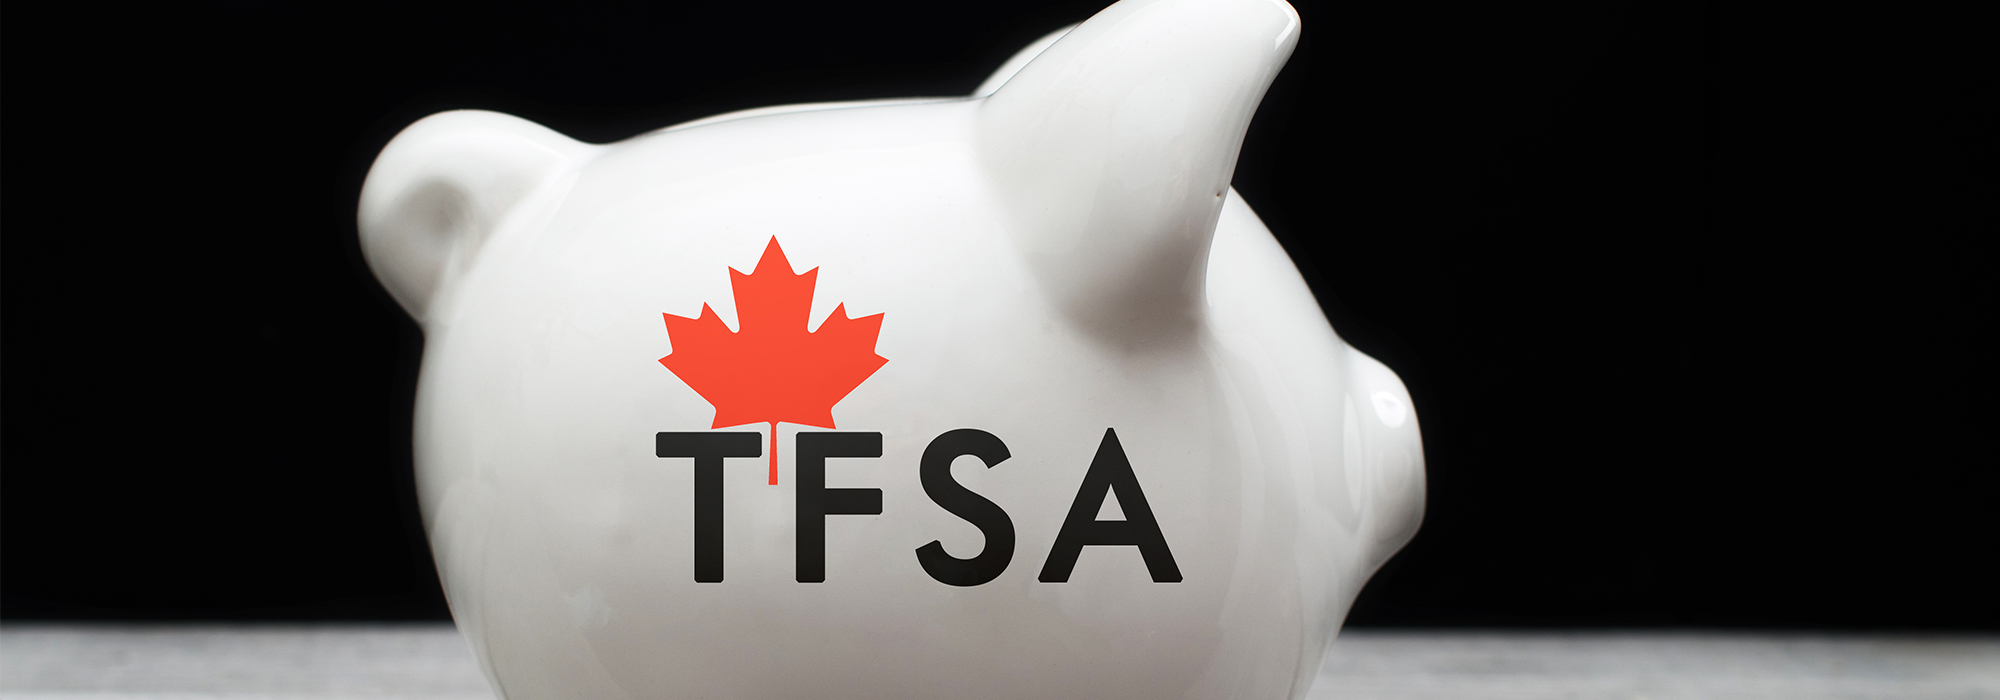 TFSAs were supposed to help low-income Canadians save for retirement